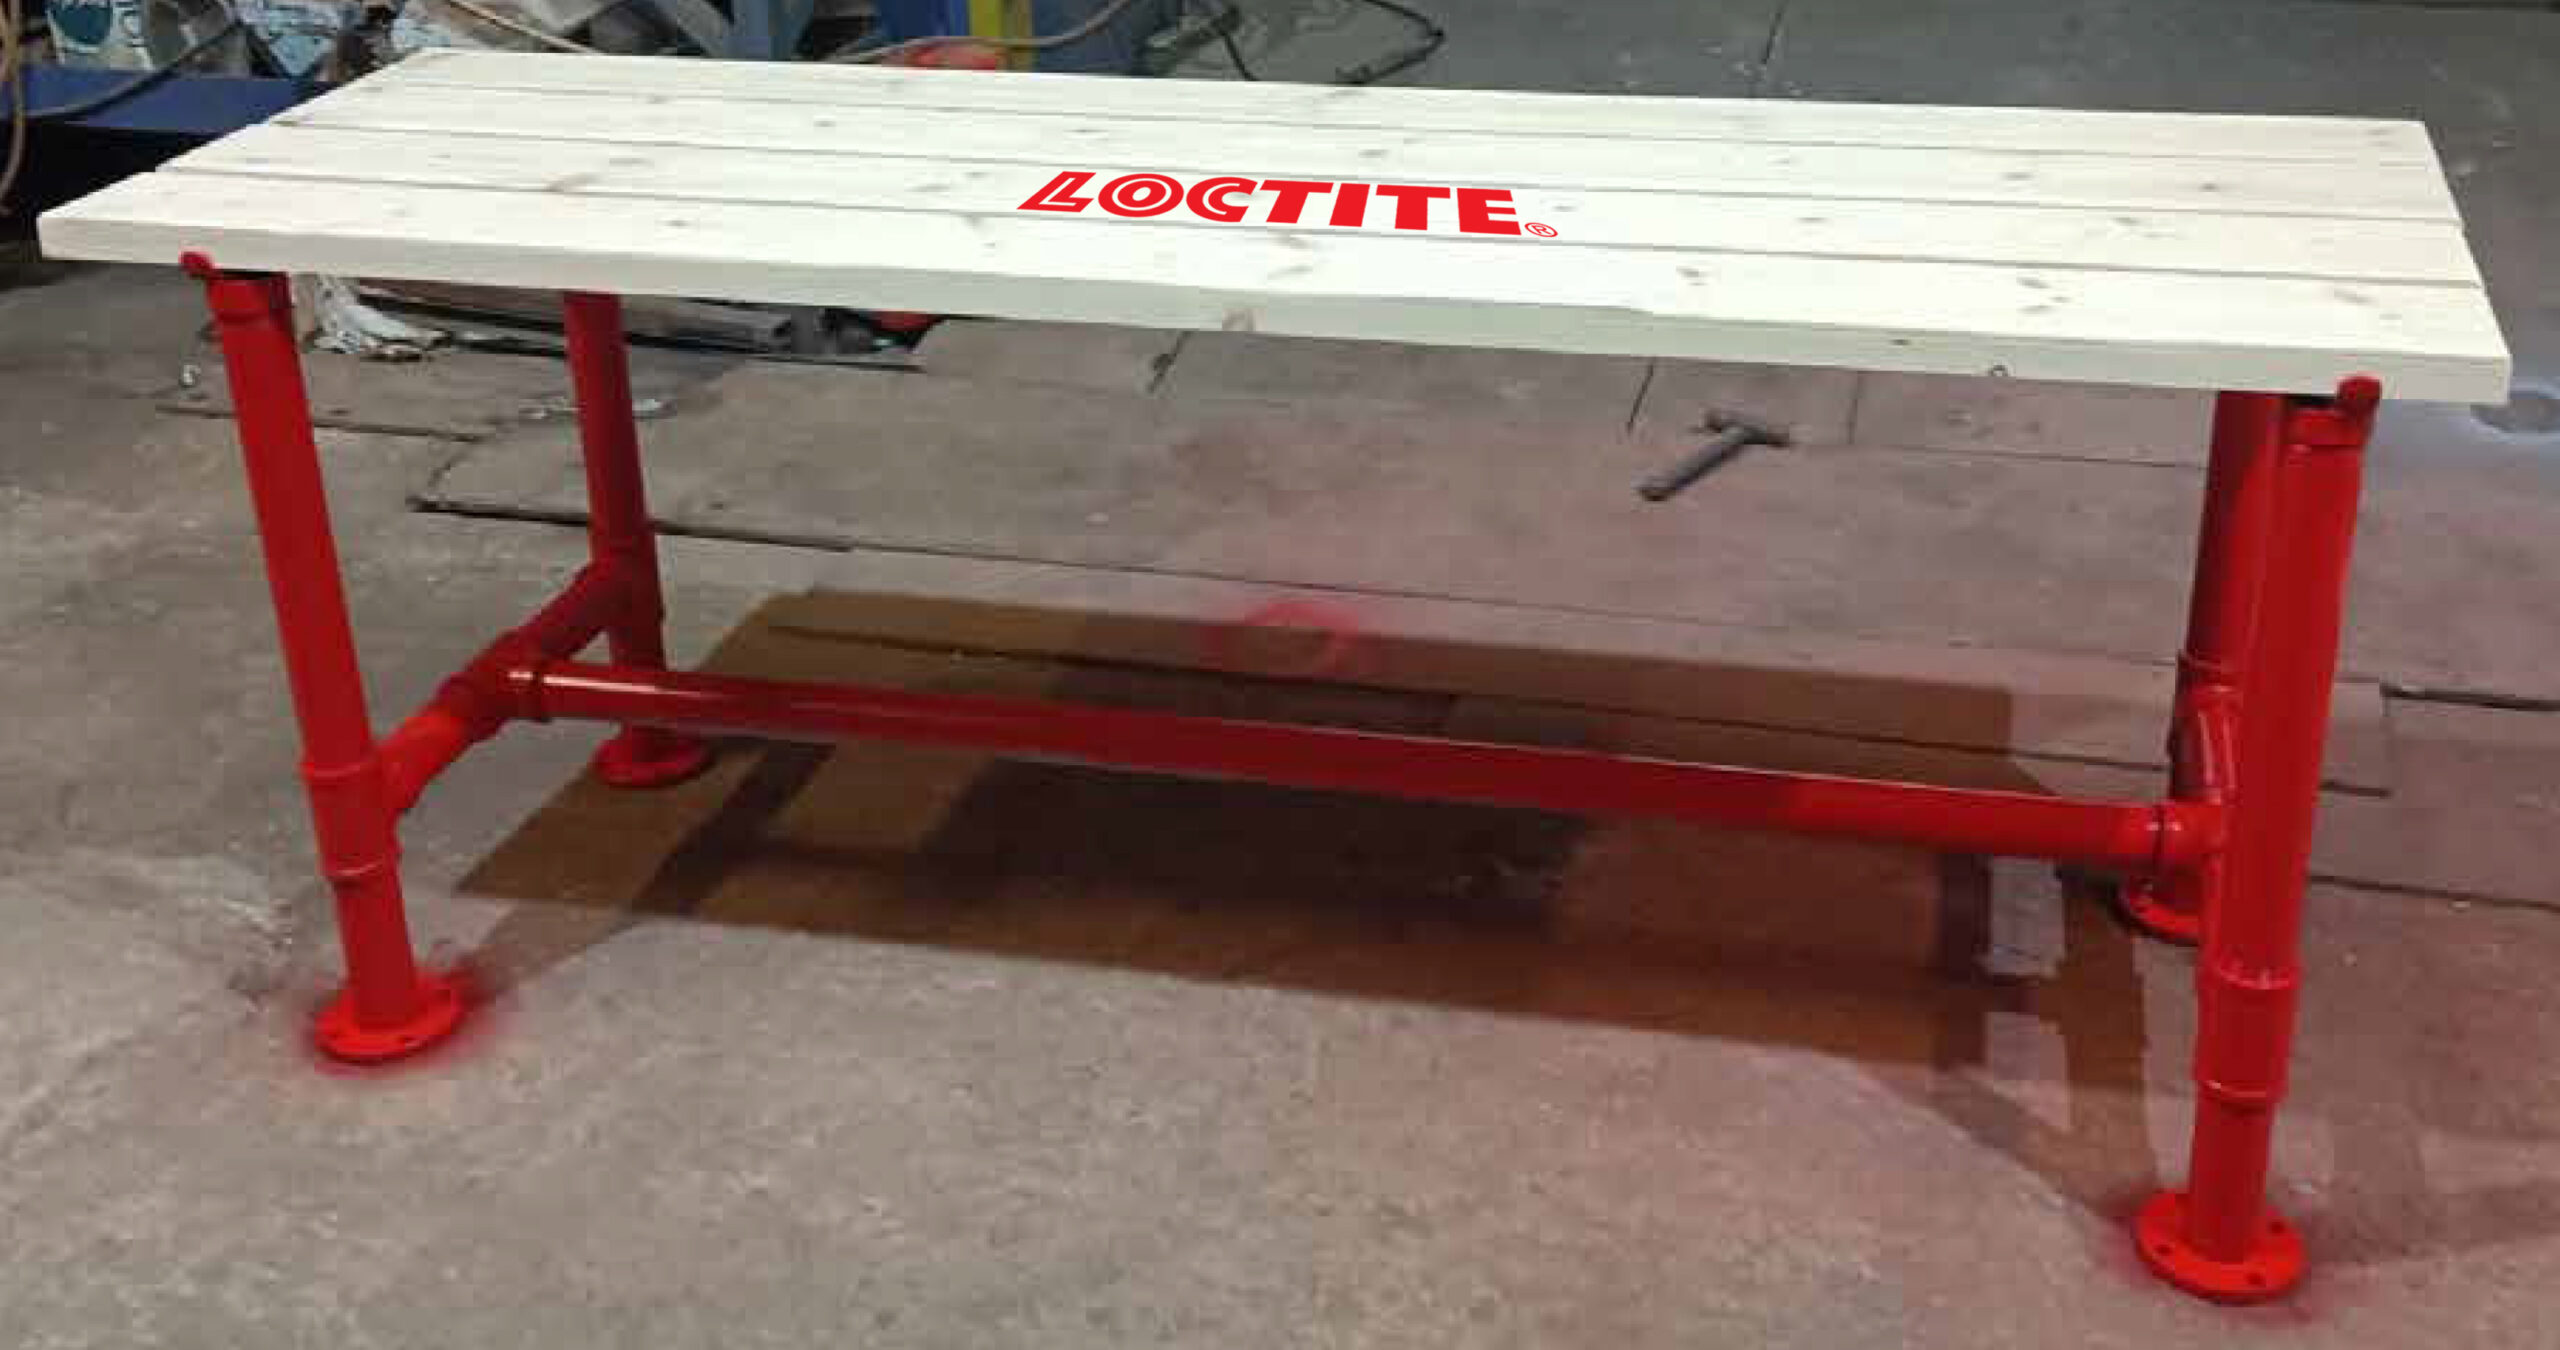 loctite working bench